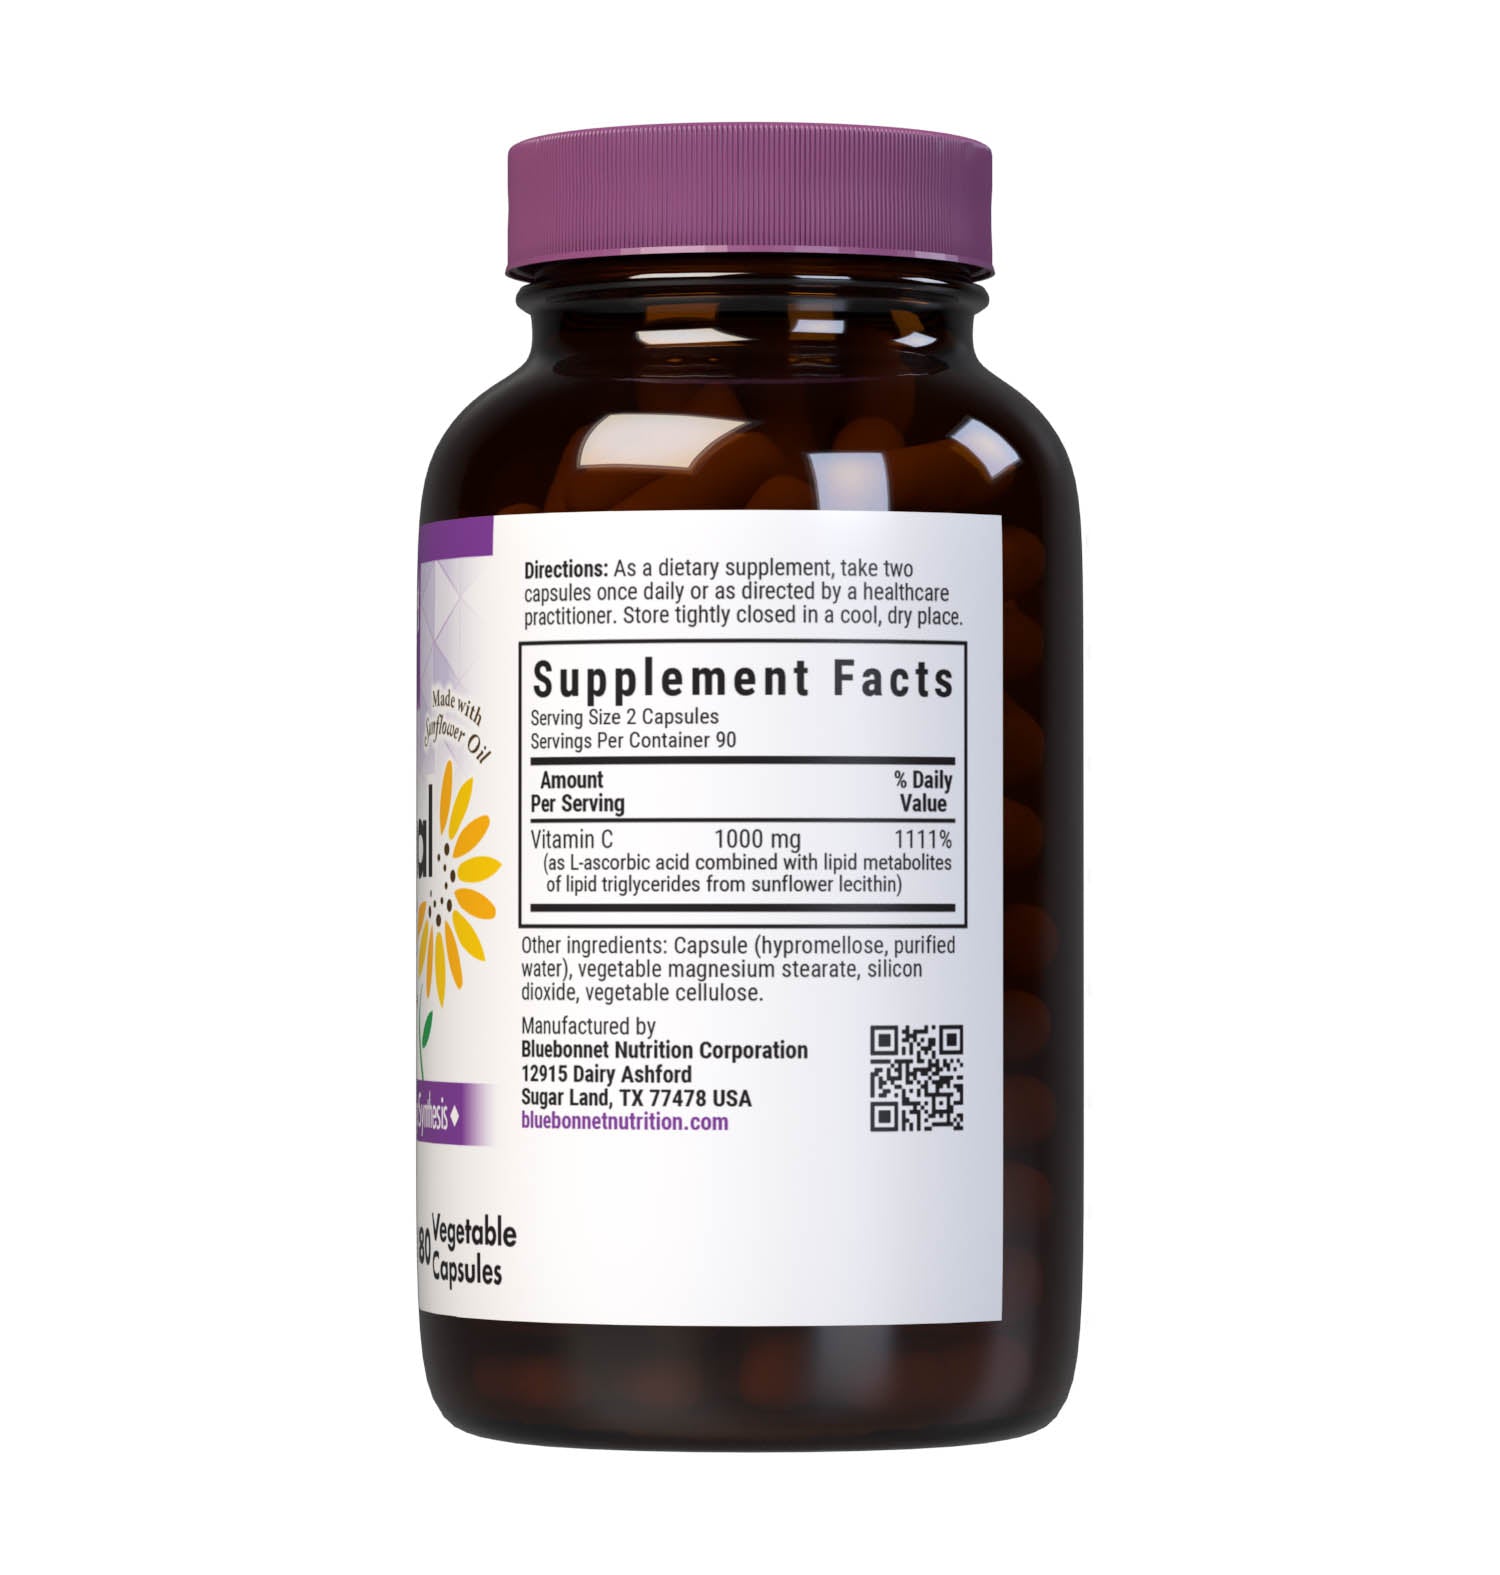 Formulated with Liposomal Pureway-C, 180 Vegetable Capsules a patented and clinically tested form of vitamin C that fuses ascorbic acid and citrus bioflavonoids to lipid metabolites such as fatty acids, esters, and fatty alcohols for better delivery, absorption and uptake to help support immune health, joint comfort & collagen synthesis. Supplement facts panel. #size_180 count